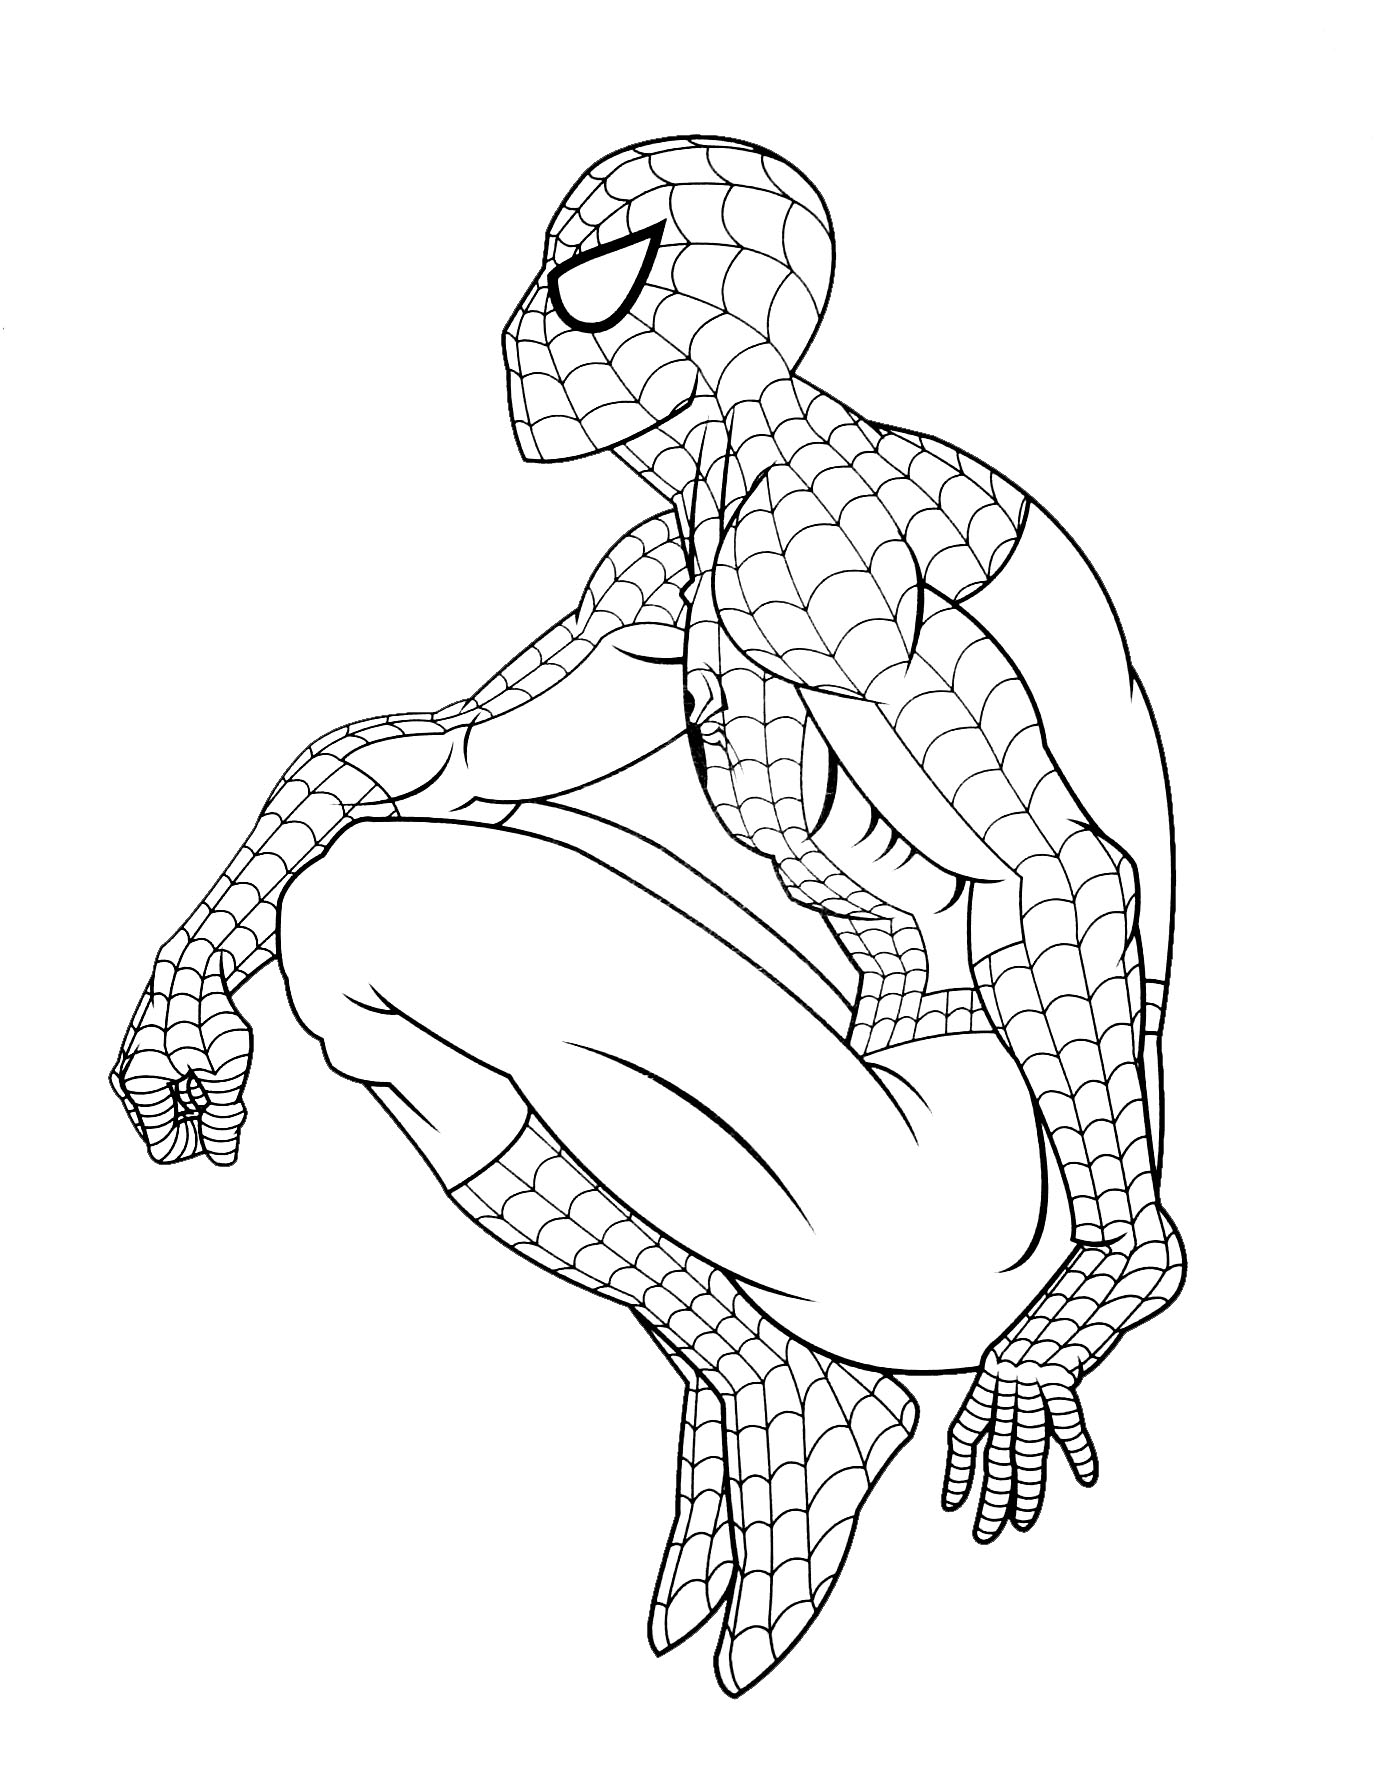 Spiderman coloring pages to download for free Spiderman Kids Coloring